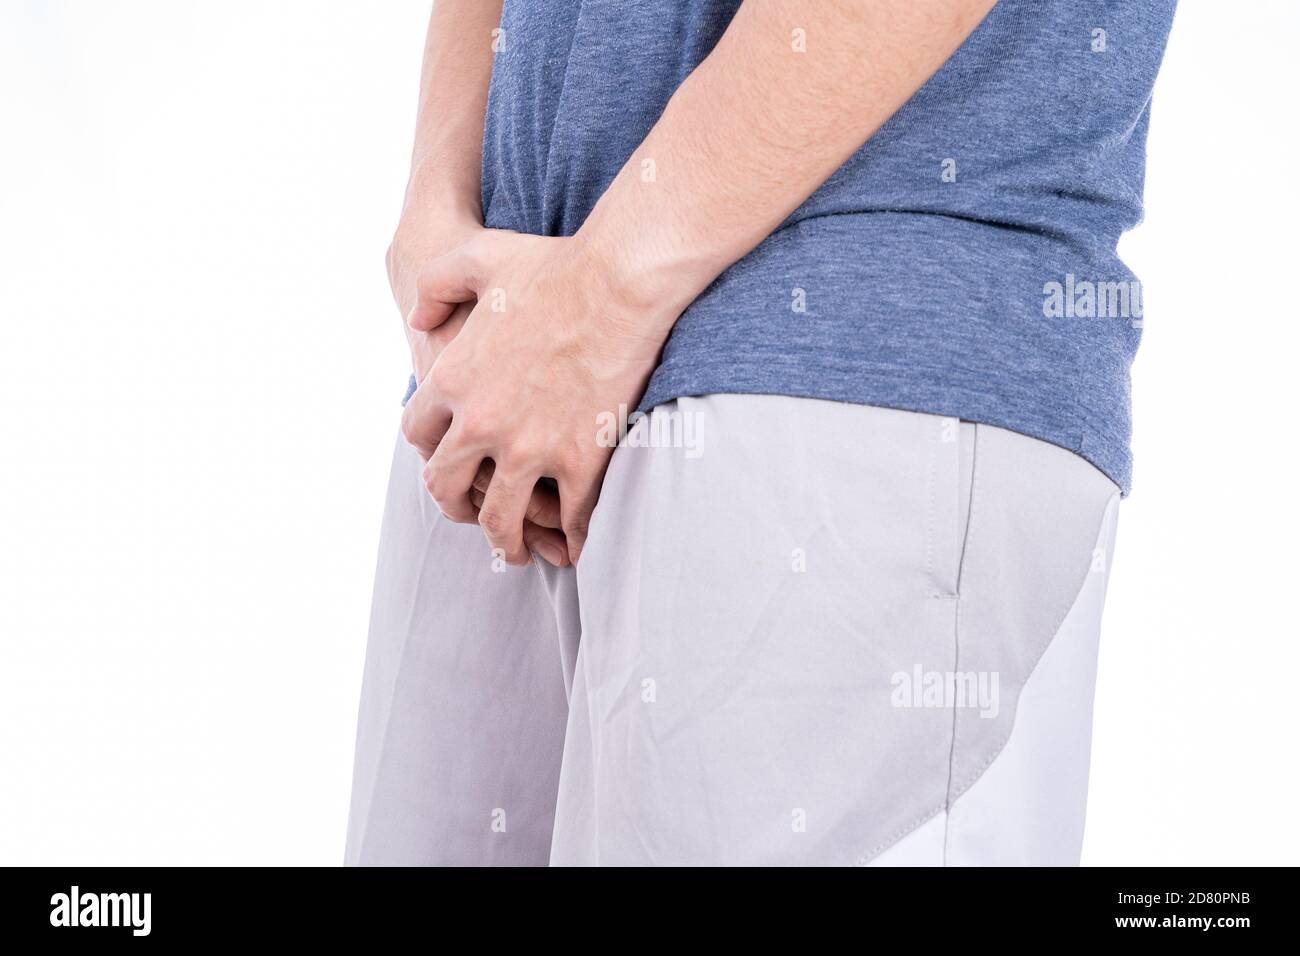 Man hands holding his crotch isolated white background. Medical, healthcare for advertising concept. Stock Photo